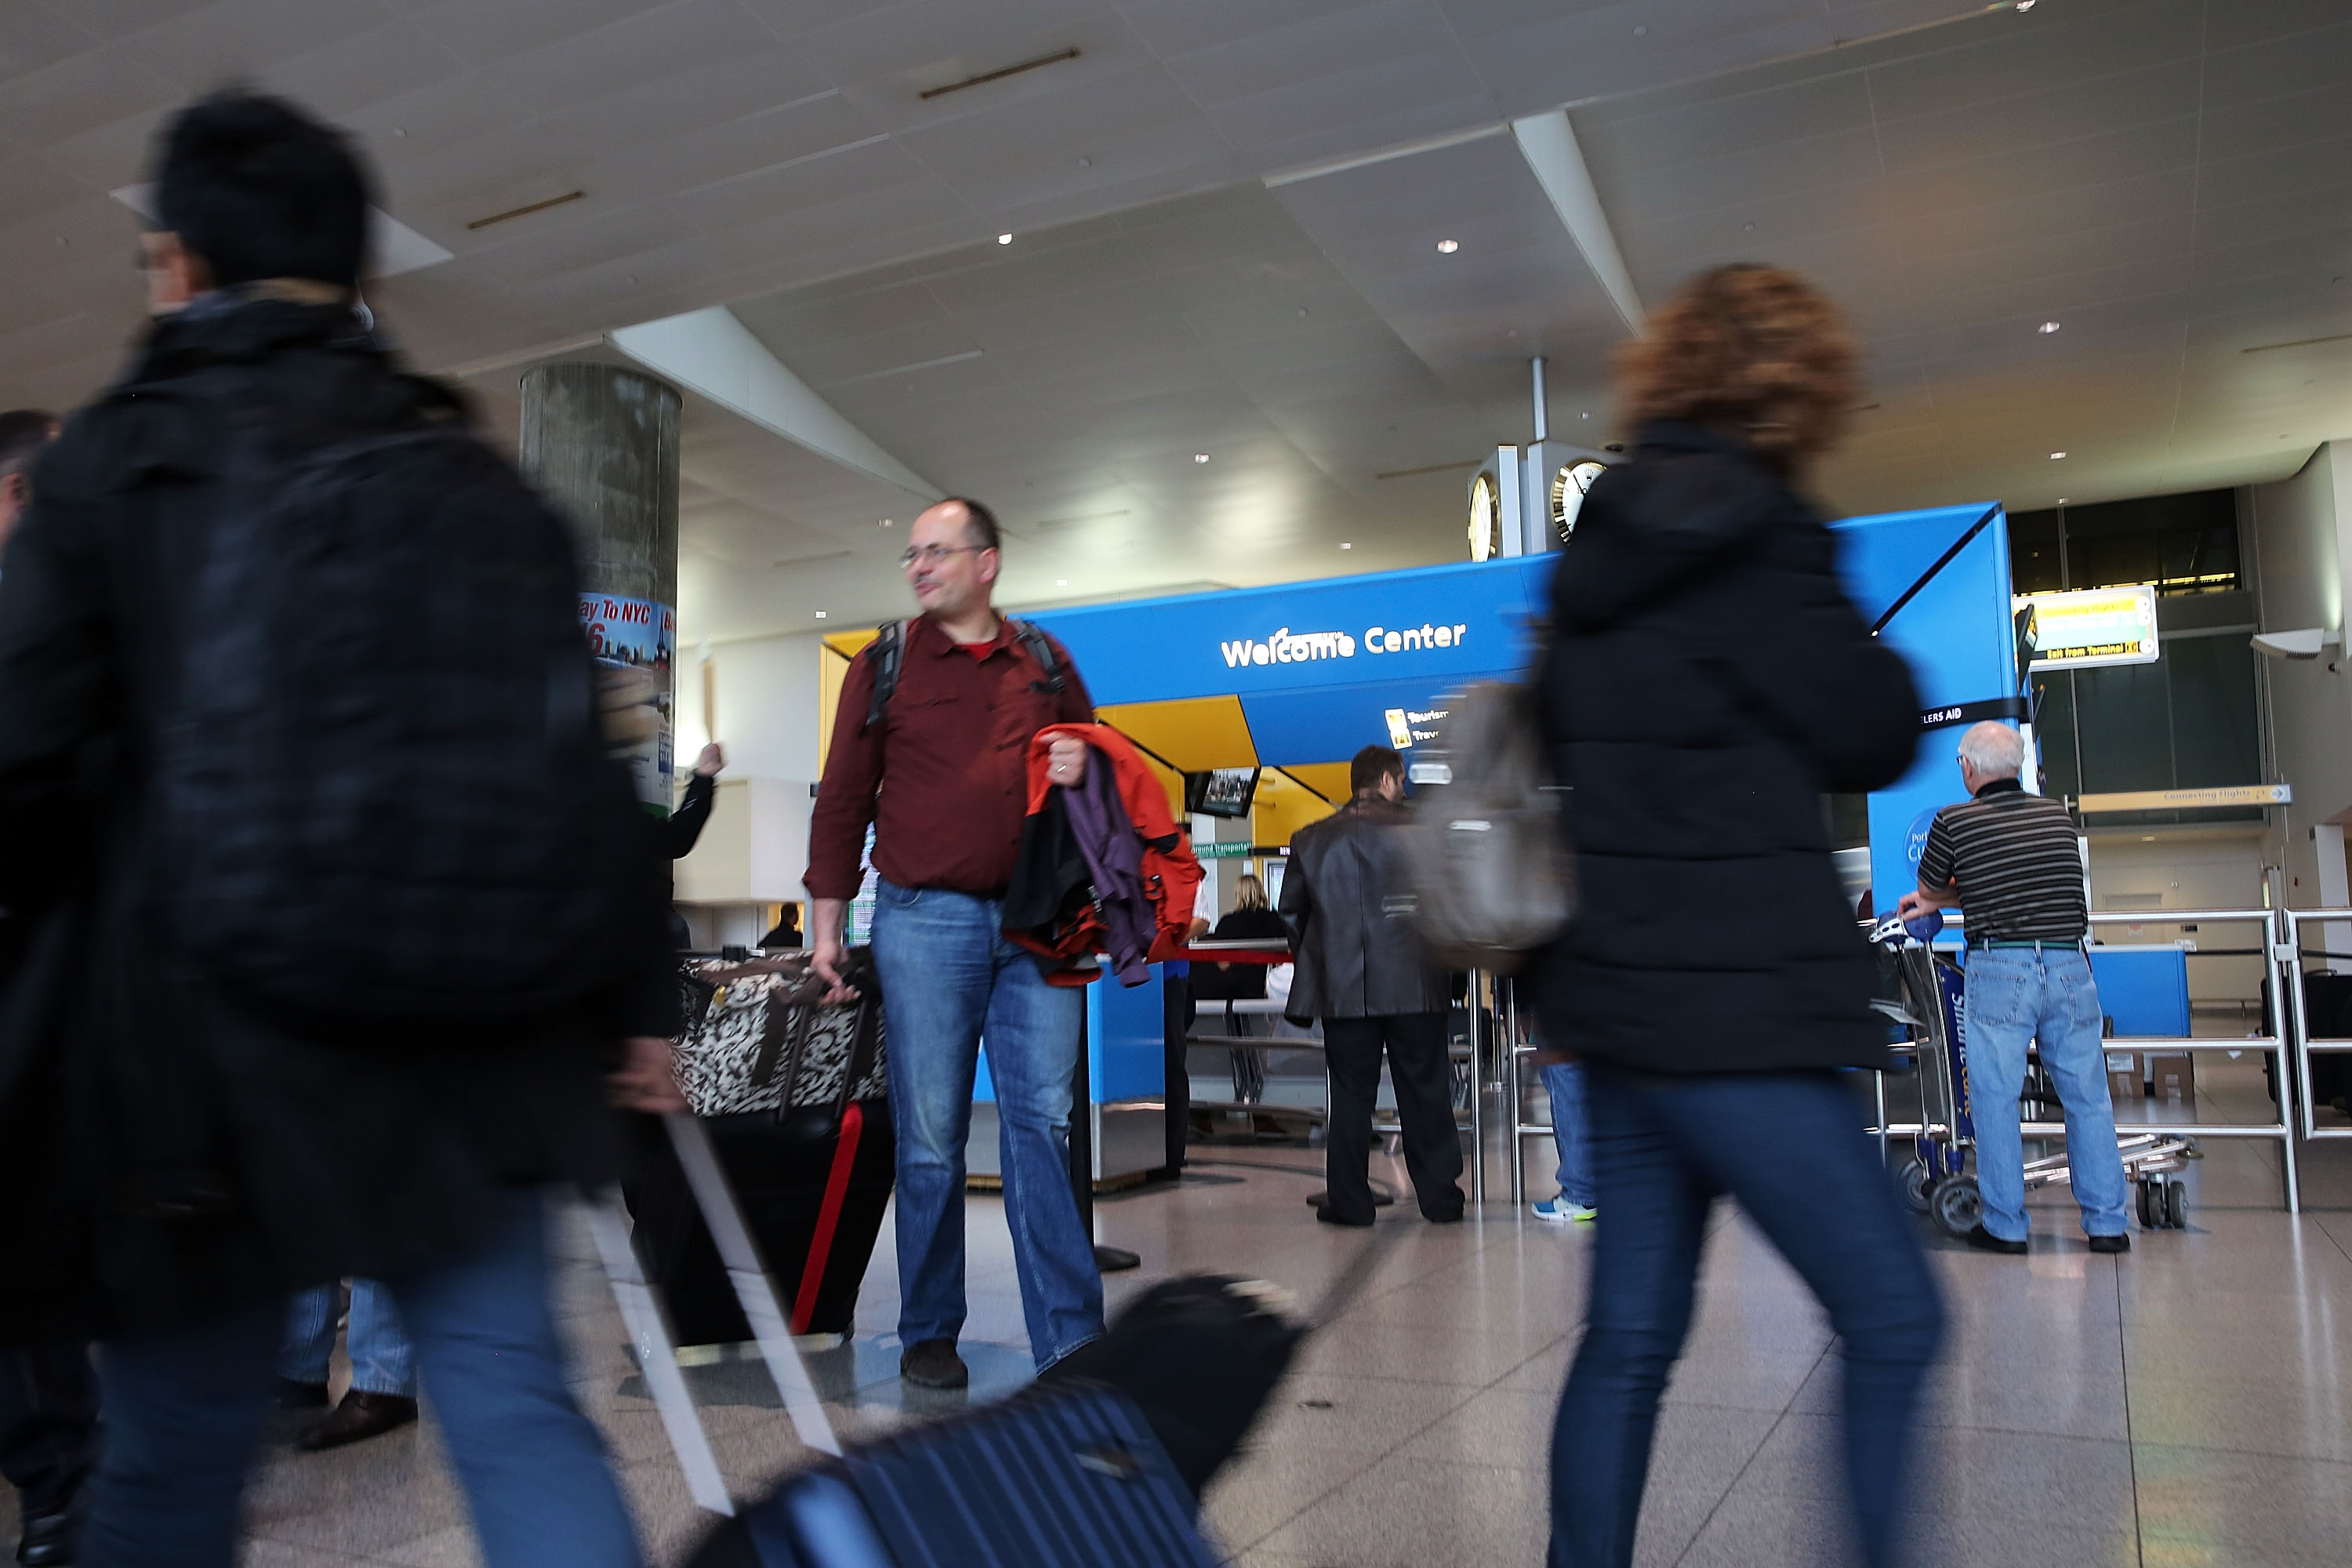 People arrive at the international arrivals terminal at New York's John F. Kennedy Airport  (JFK ) airport on October 11, 2014 in New York City. (Spencer Platt&mdash;Getty Images)